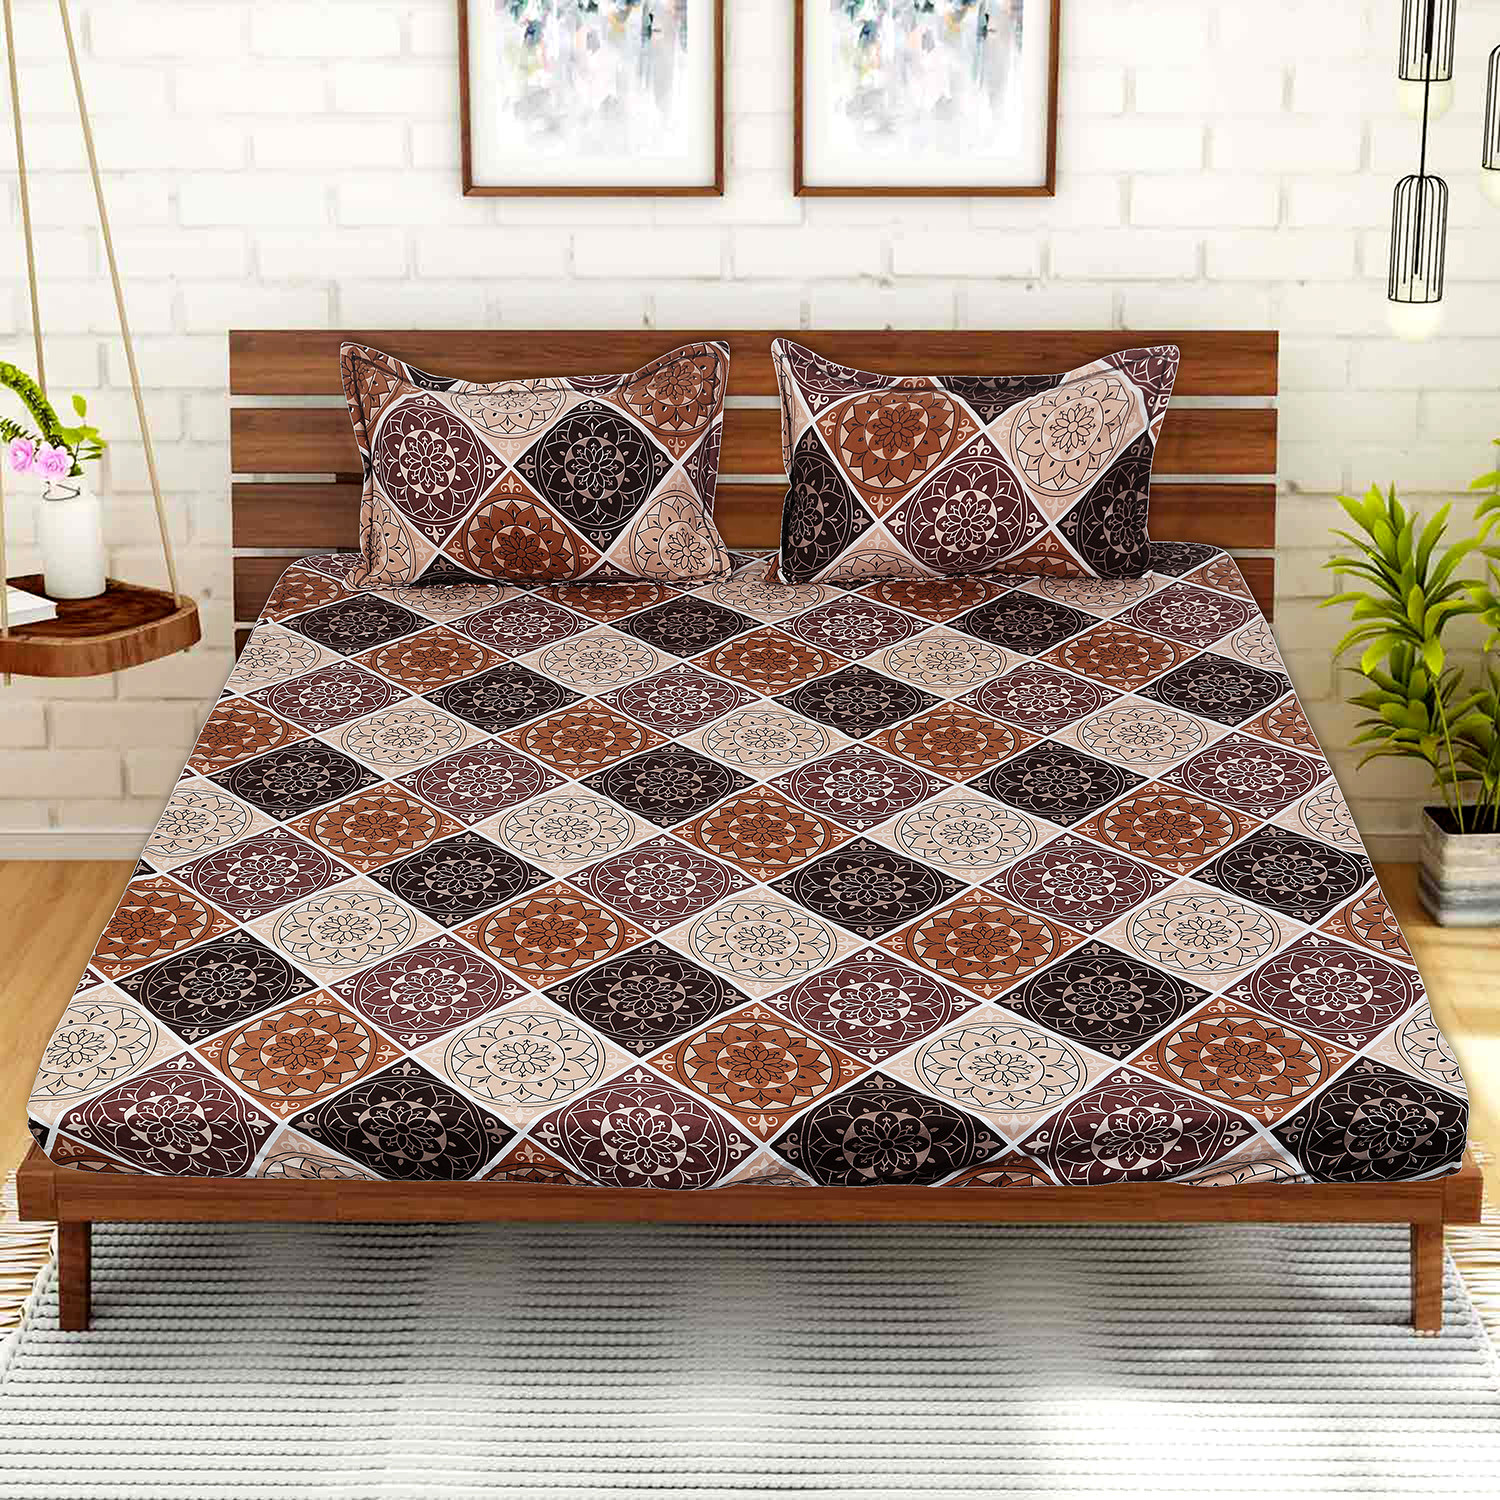 Kuber Industries Fitted Double Bedsheet|Rangoli Print Premium Glace Cotton Elastic Bedsheet With Two Pillow Covers,72 x 78 Inch(Brown)